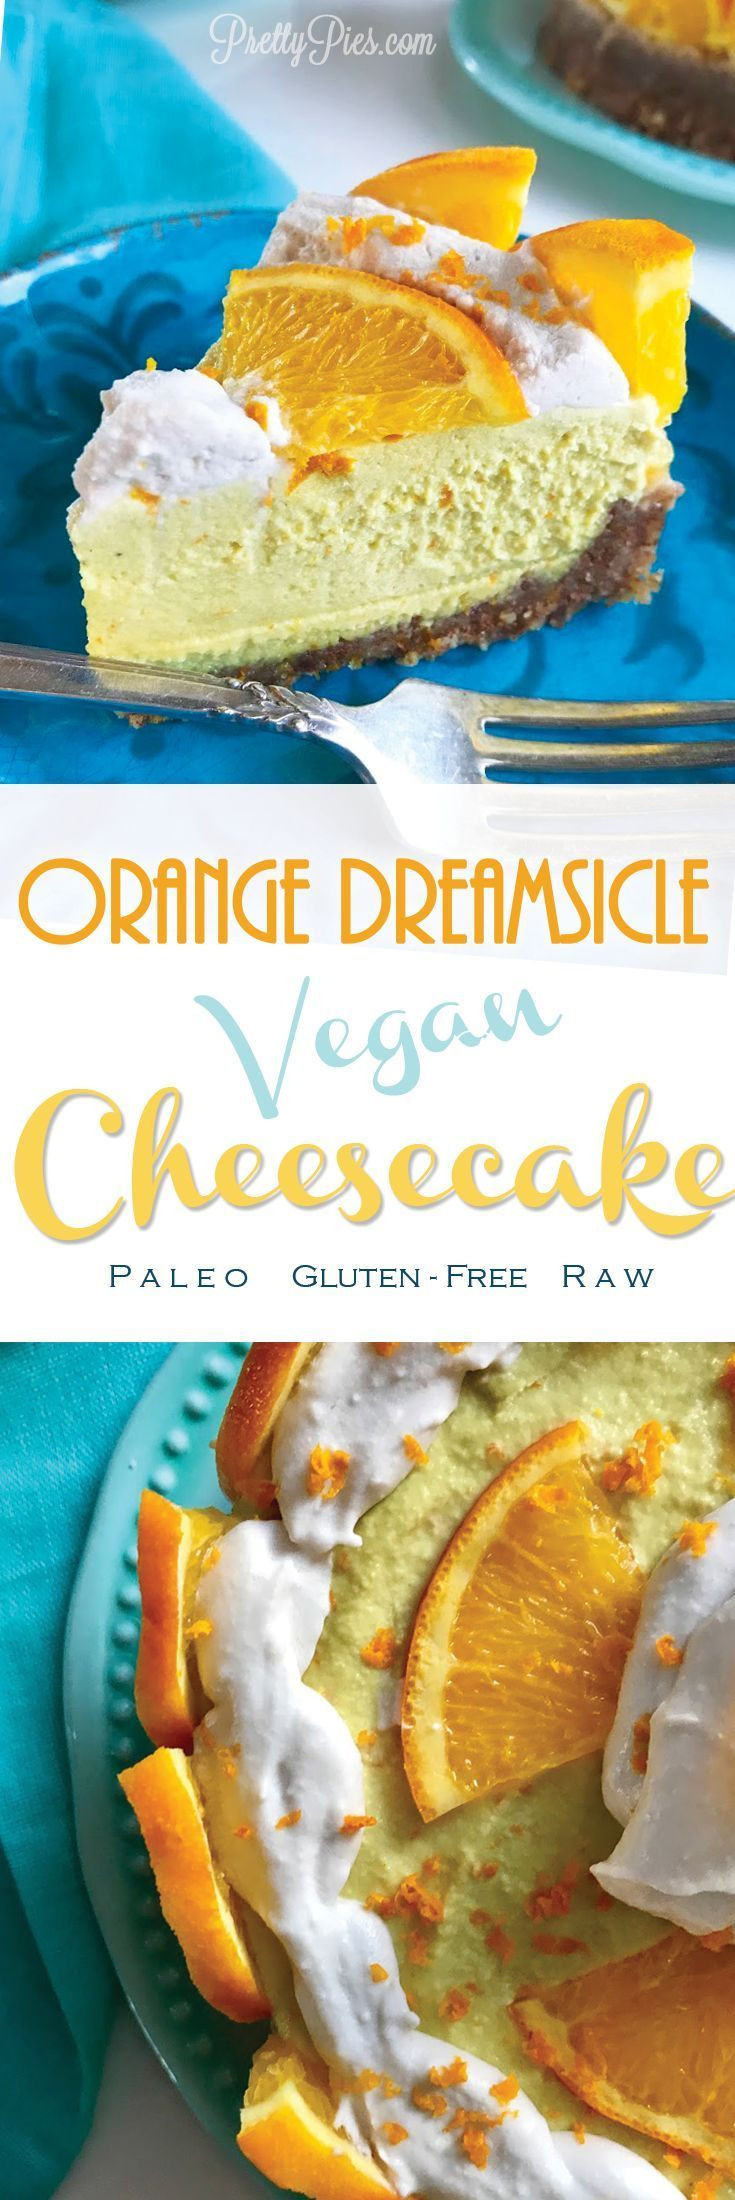 Gluten Free Dairy Free Desserts Whole Foods
 What dreams are made of Dairy free orange cheesecake